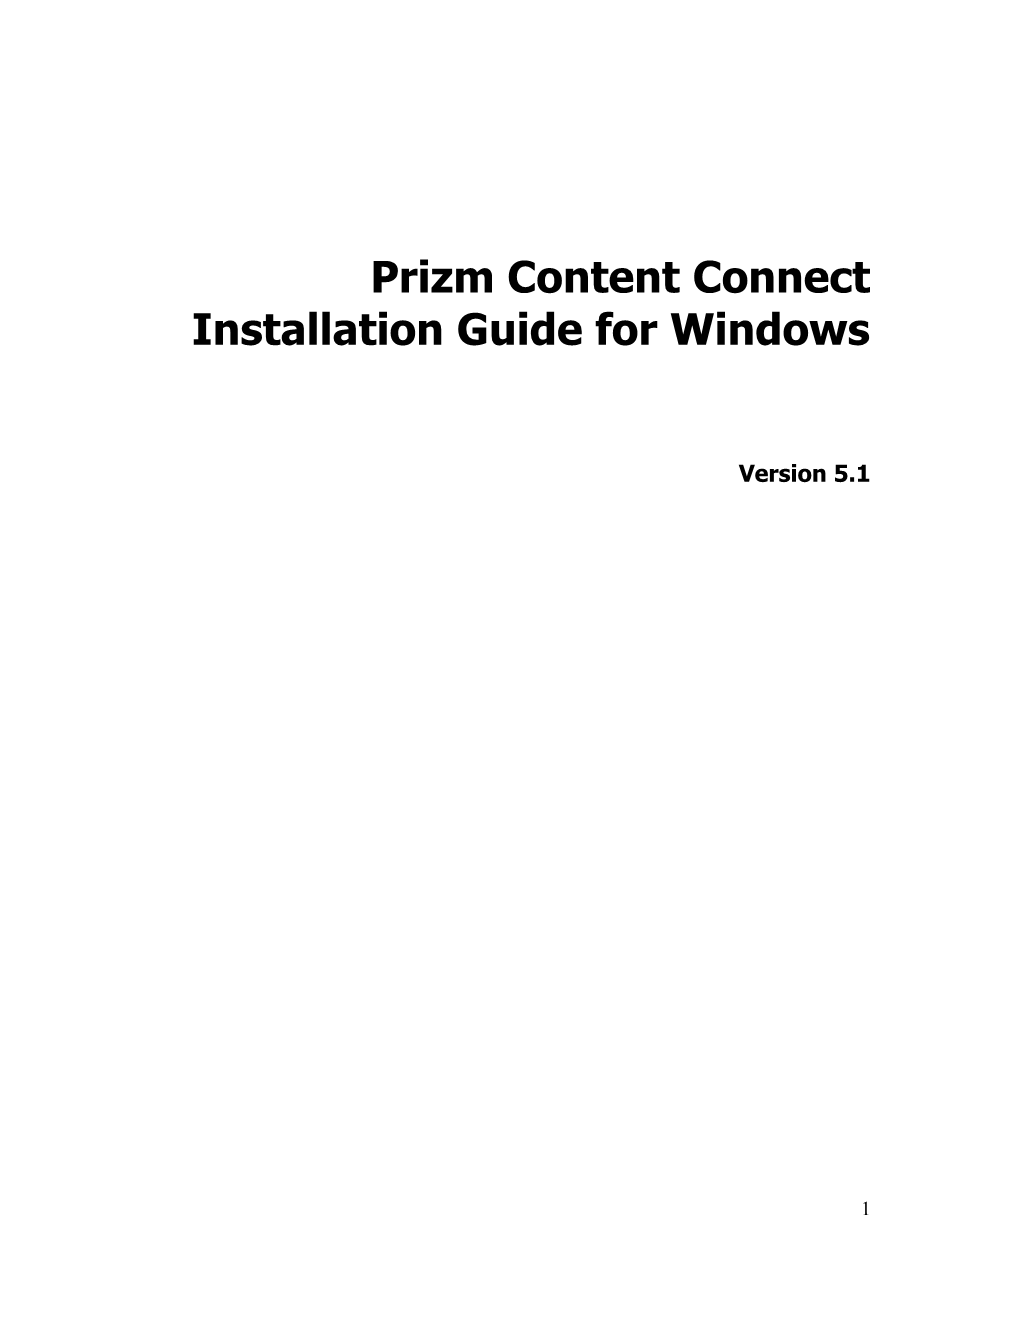 Prizm Content Connect Installation Guide for Windows